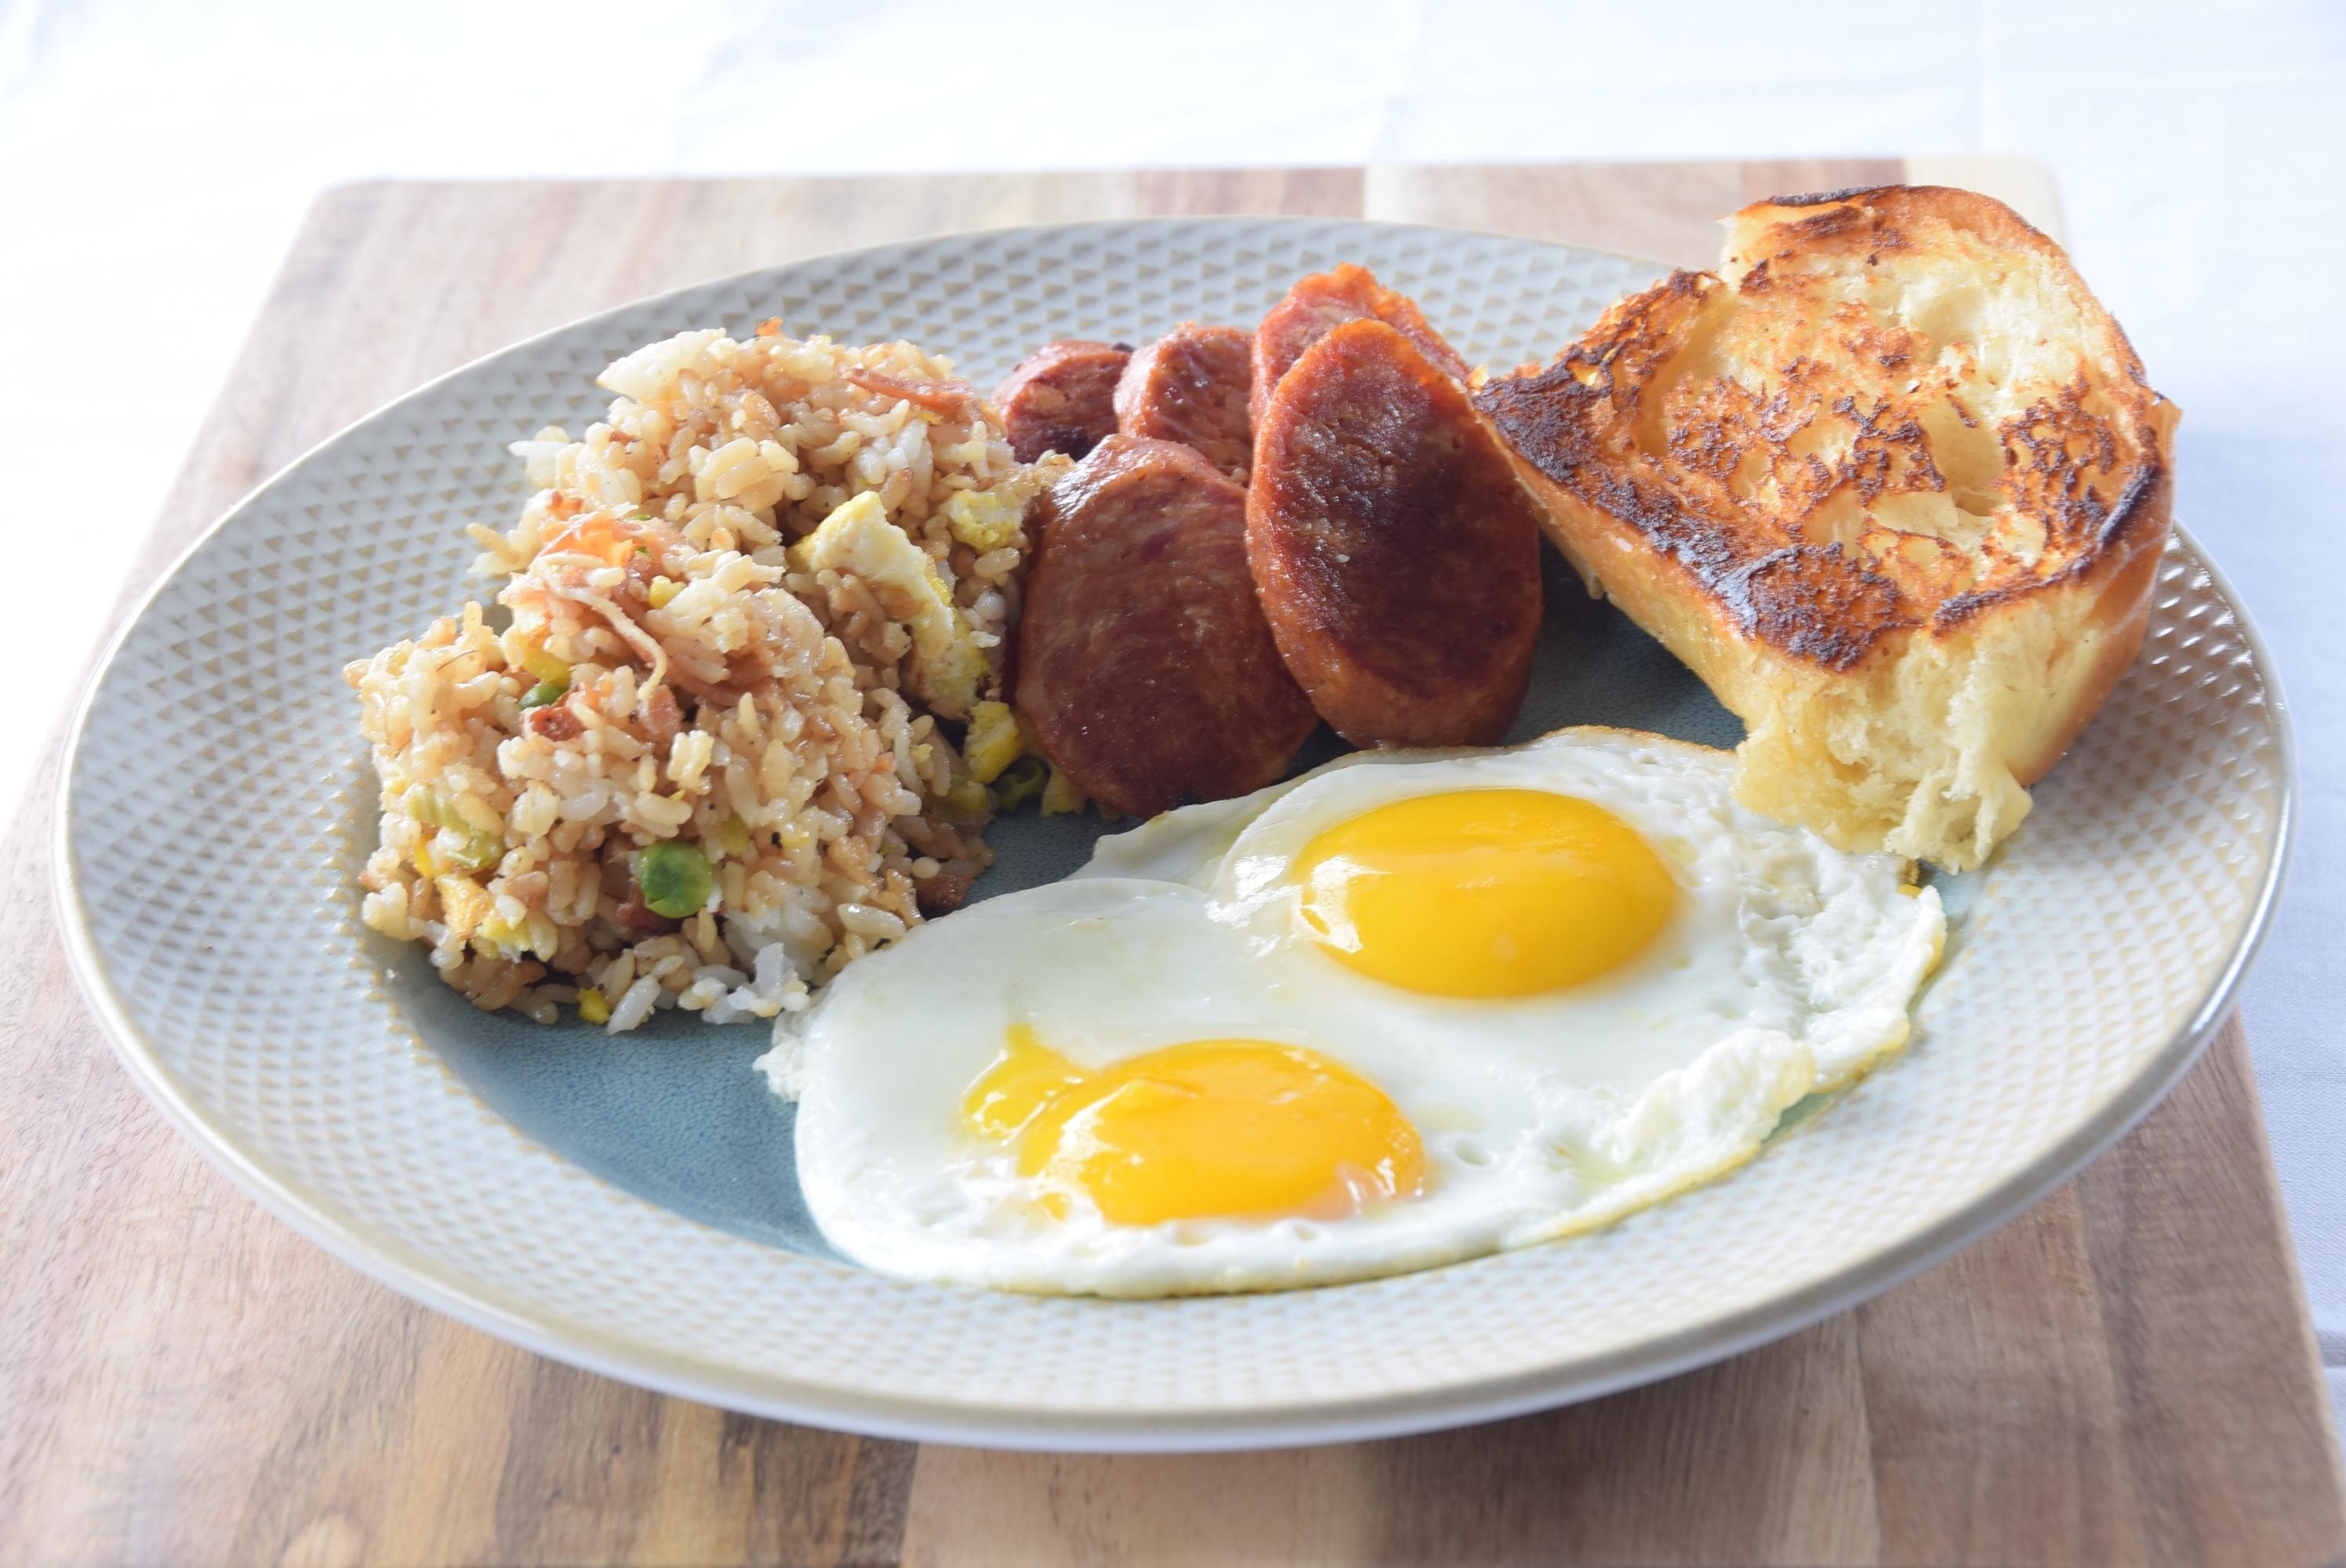 Portuguese Sausage and Eggs Plate